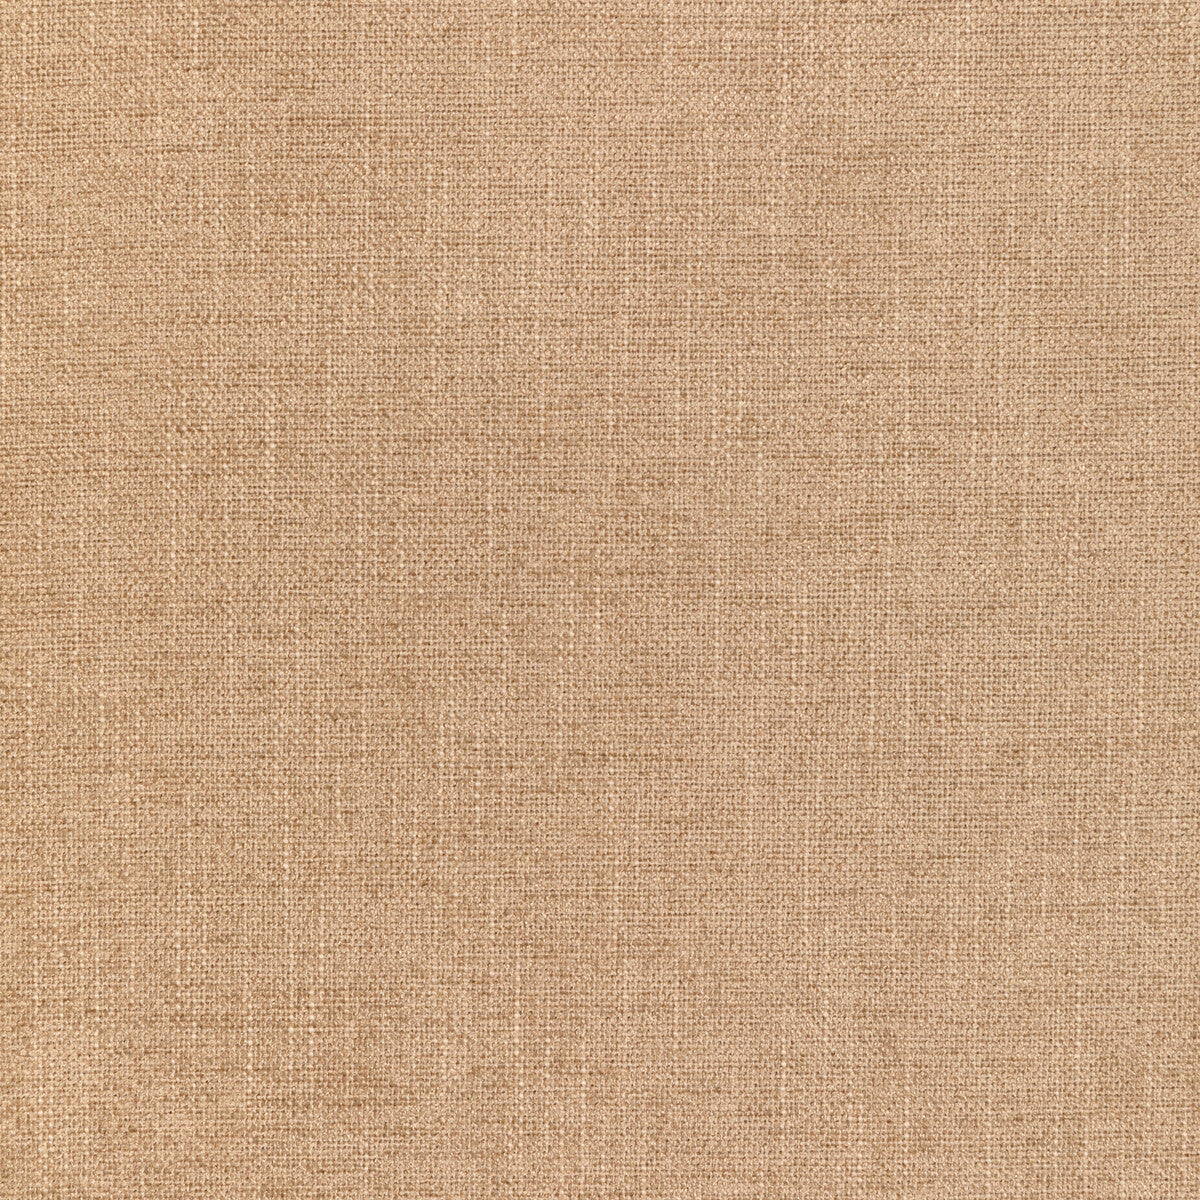 Kravet Smart fabric in 35973-116 color - pattern 35973.116.0 - by Kravet Smart in the Performance Crypton Home collection